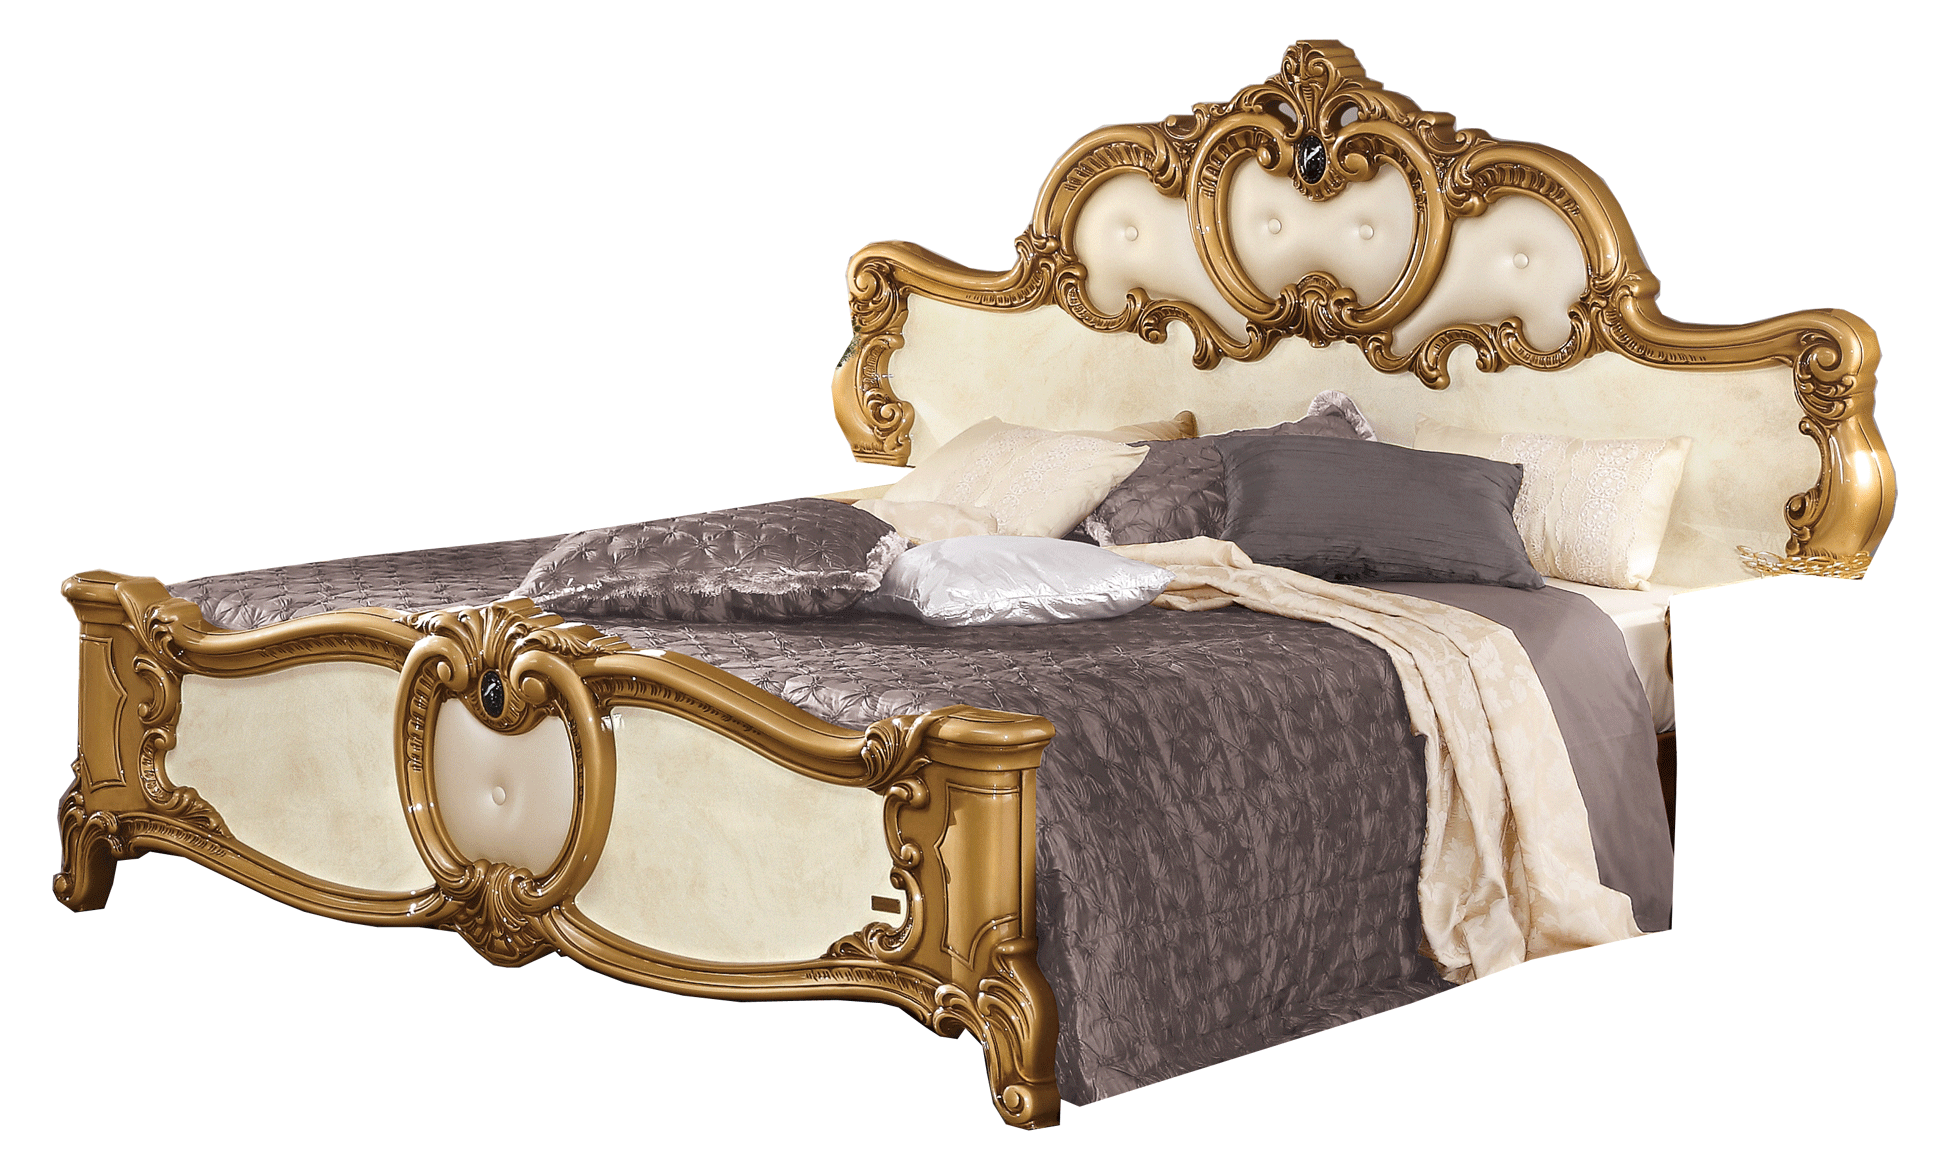 Brands Camel Classic Collection, Italy Barocco Bed Ivory w/Gold, Camelgroup Italy